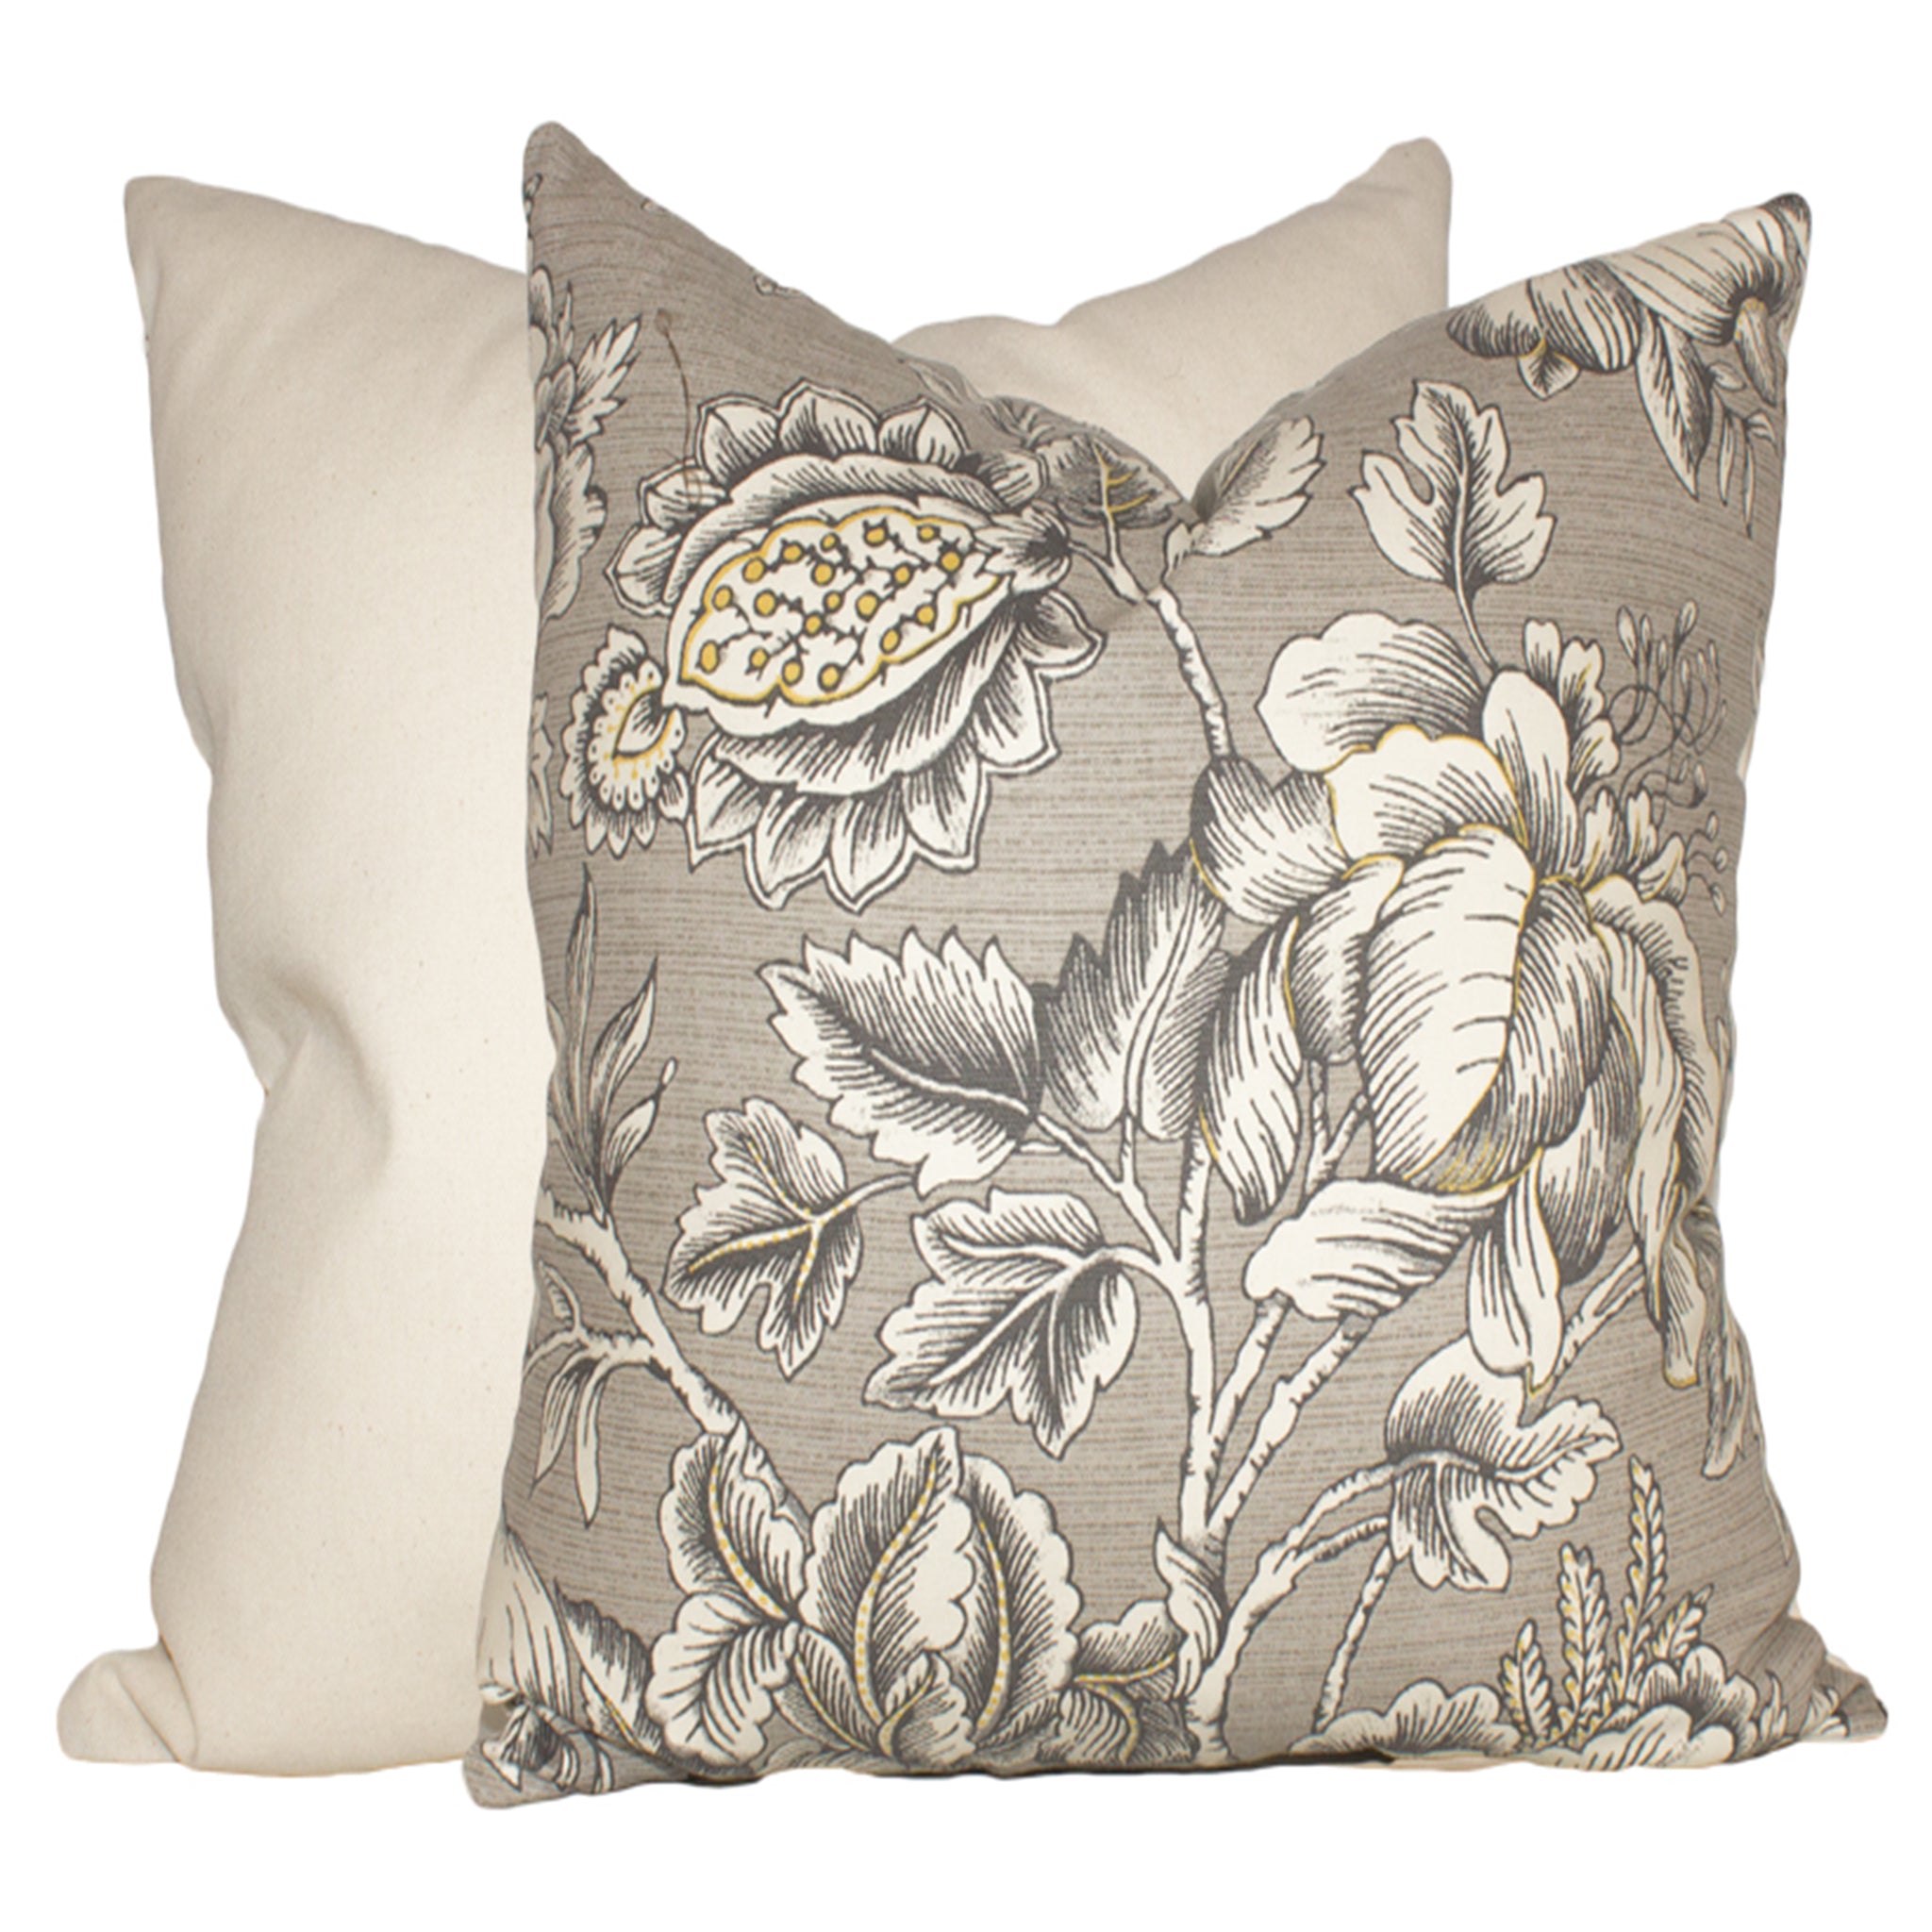 Pods and Stems Pillow